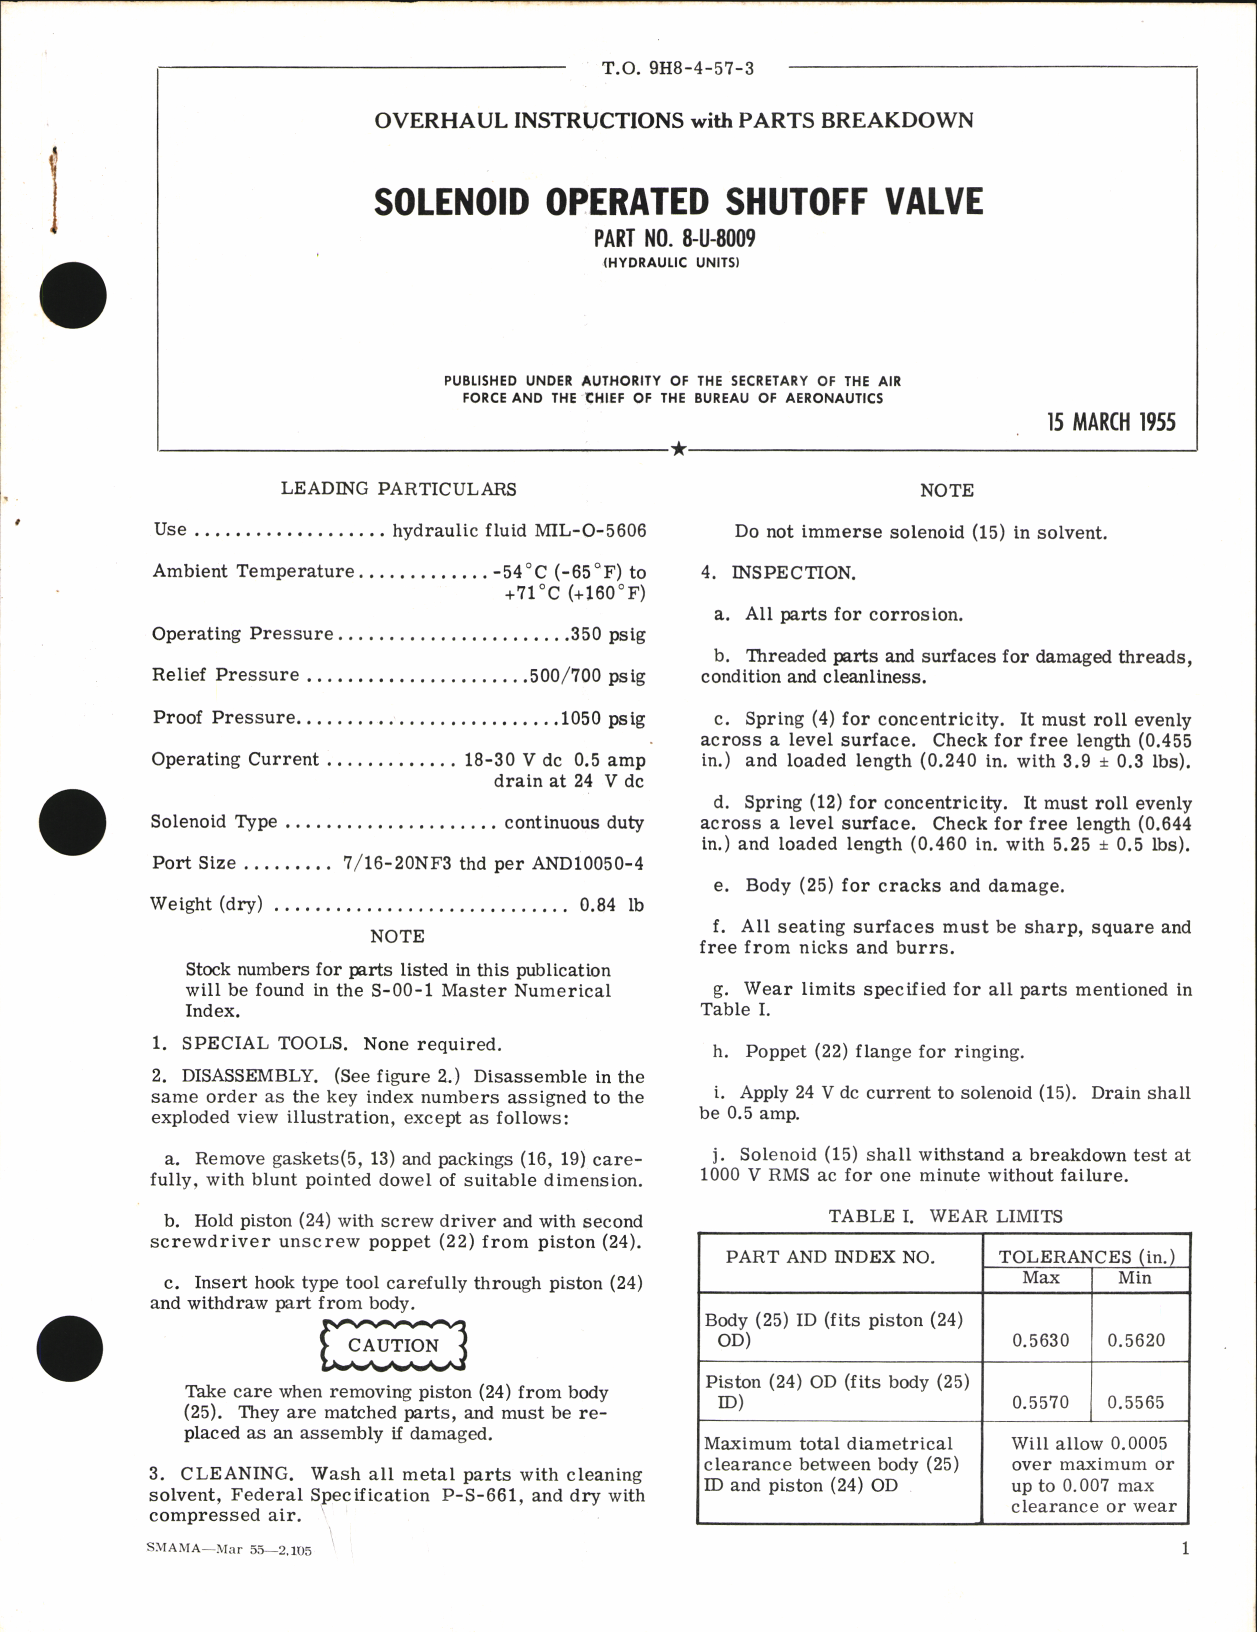 Sample page 1 from AirCorps Library document: Overhaul Instructions with Parts Breakdown for Solenoid Operated Shutoff Valve Part No. 8-U-8009